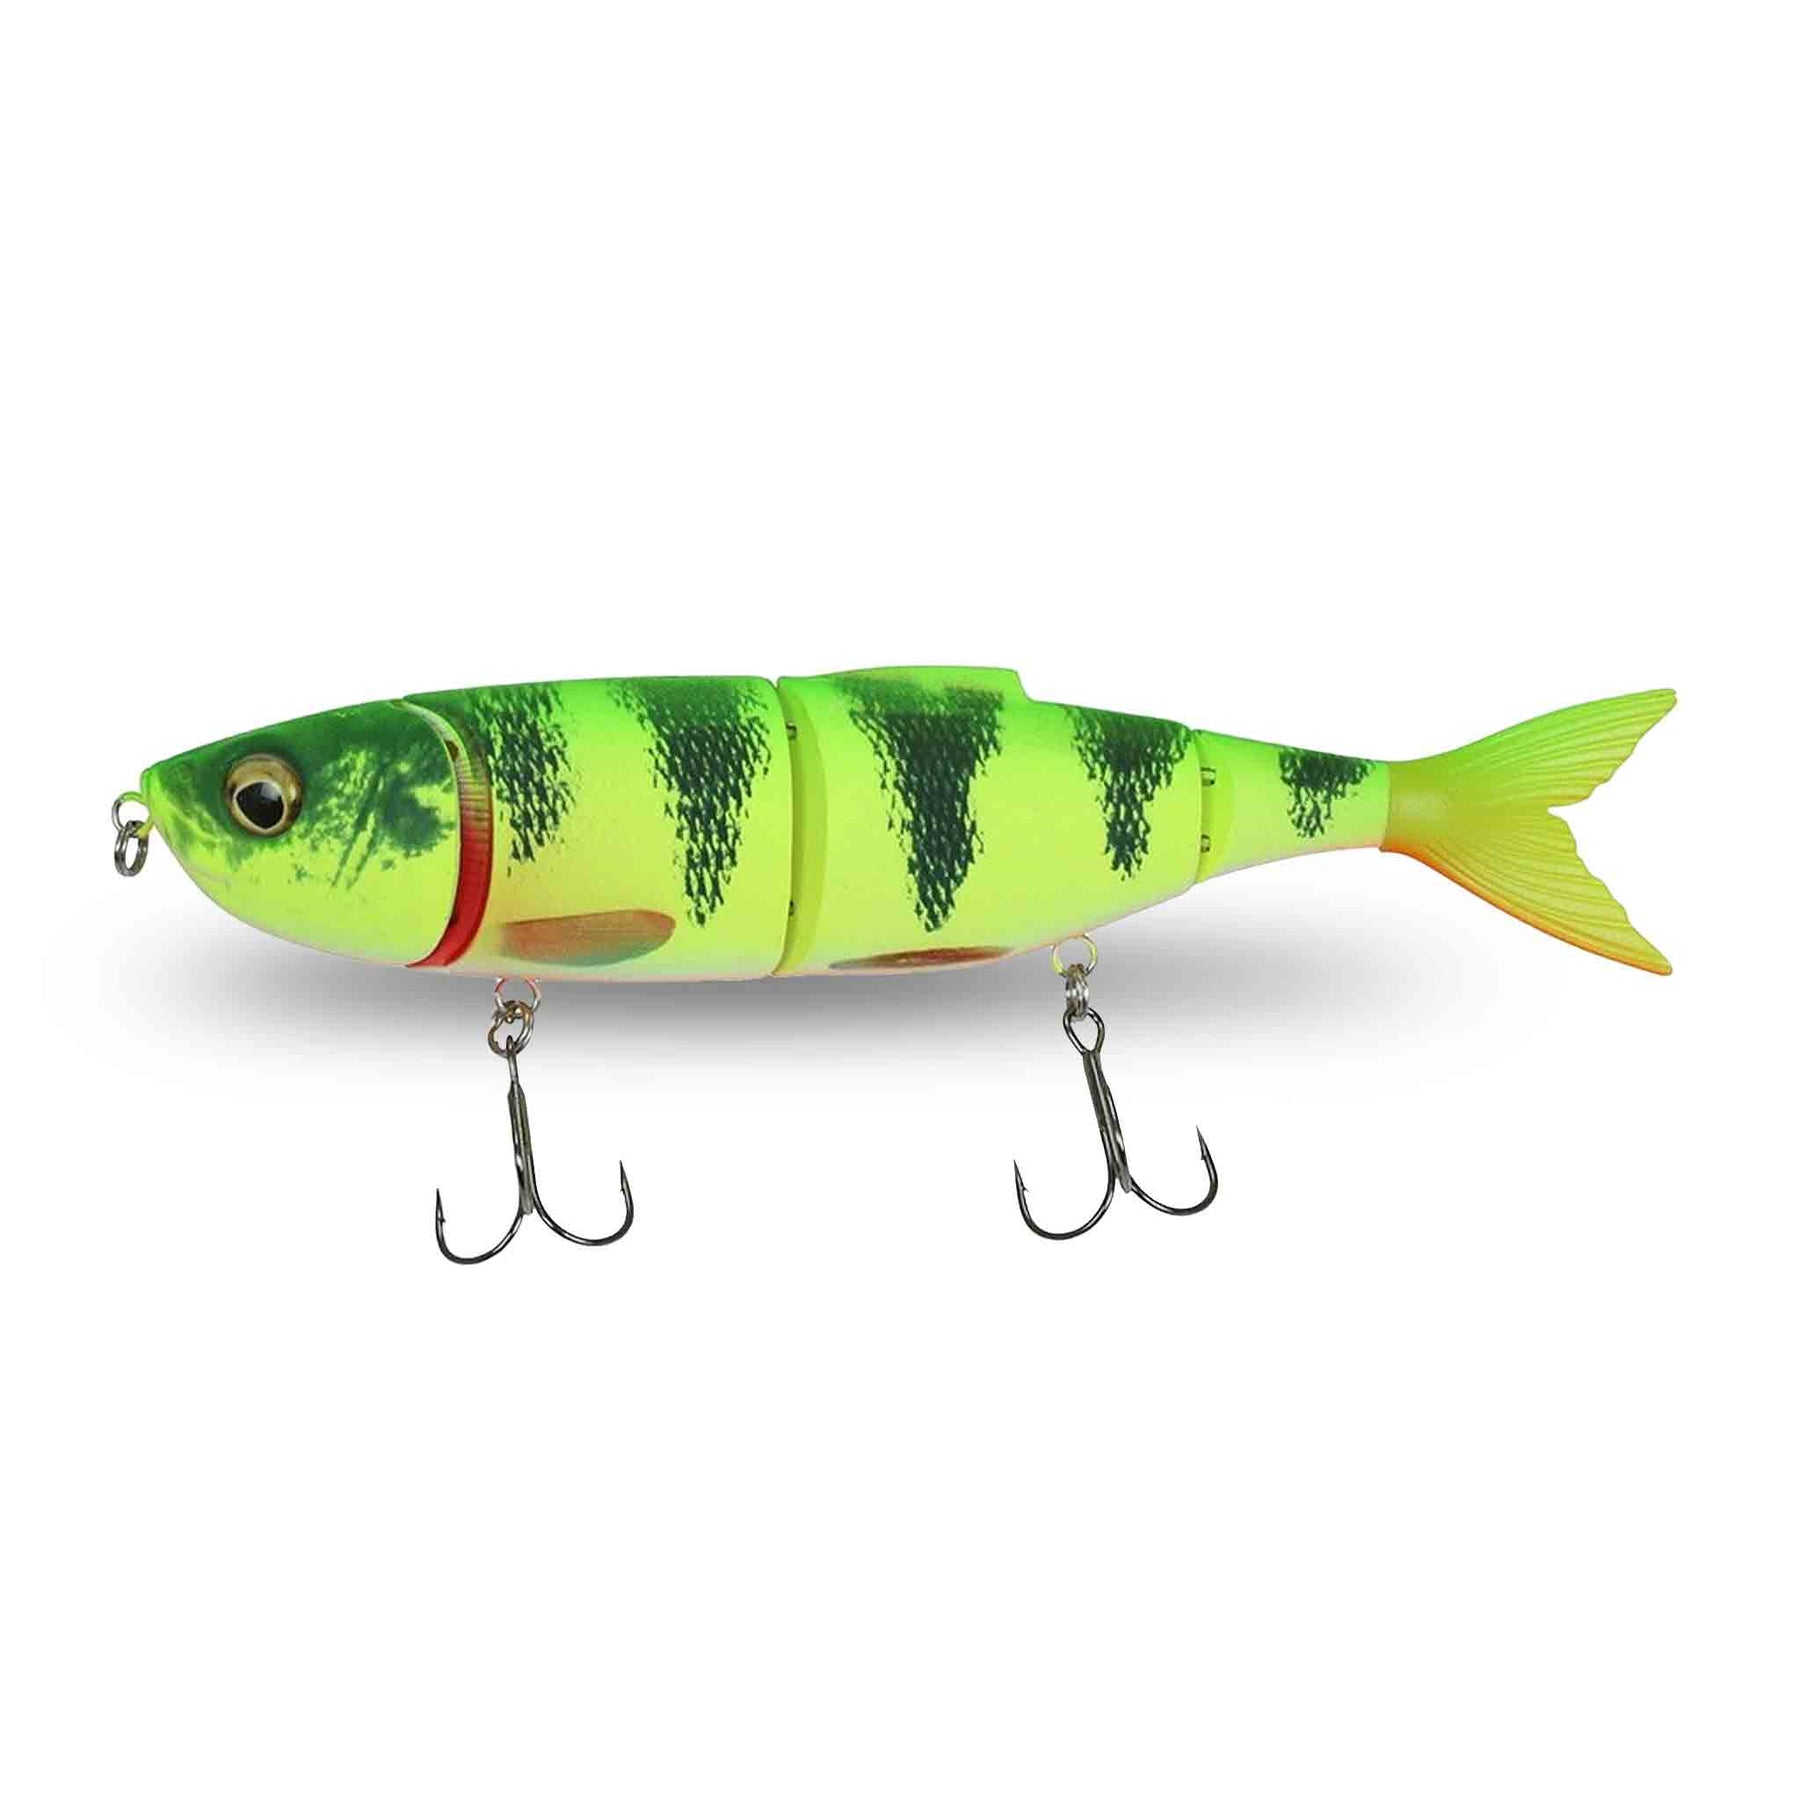 View of Swimbaits Savage Gear 4Play Pro 5" Swimbait Firetiger available at EZOKO Pike and Musky Shop